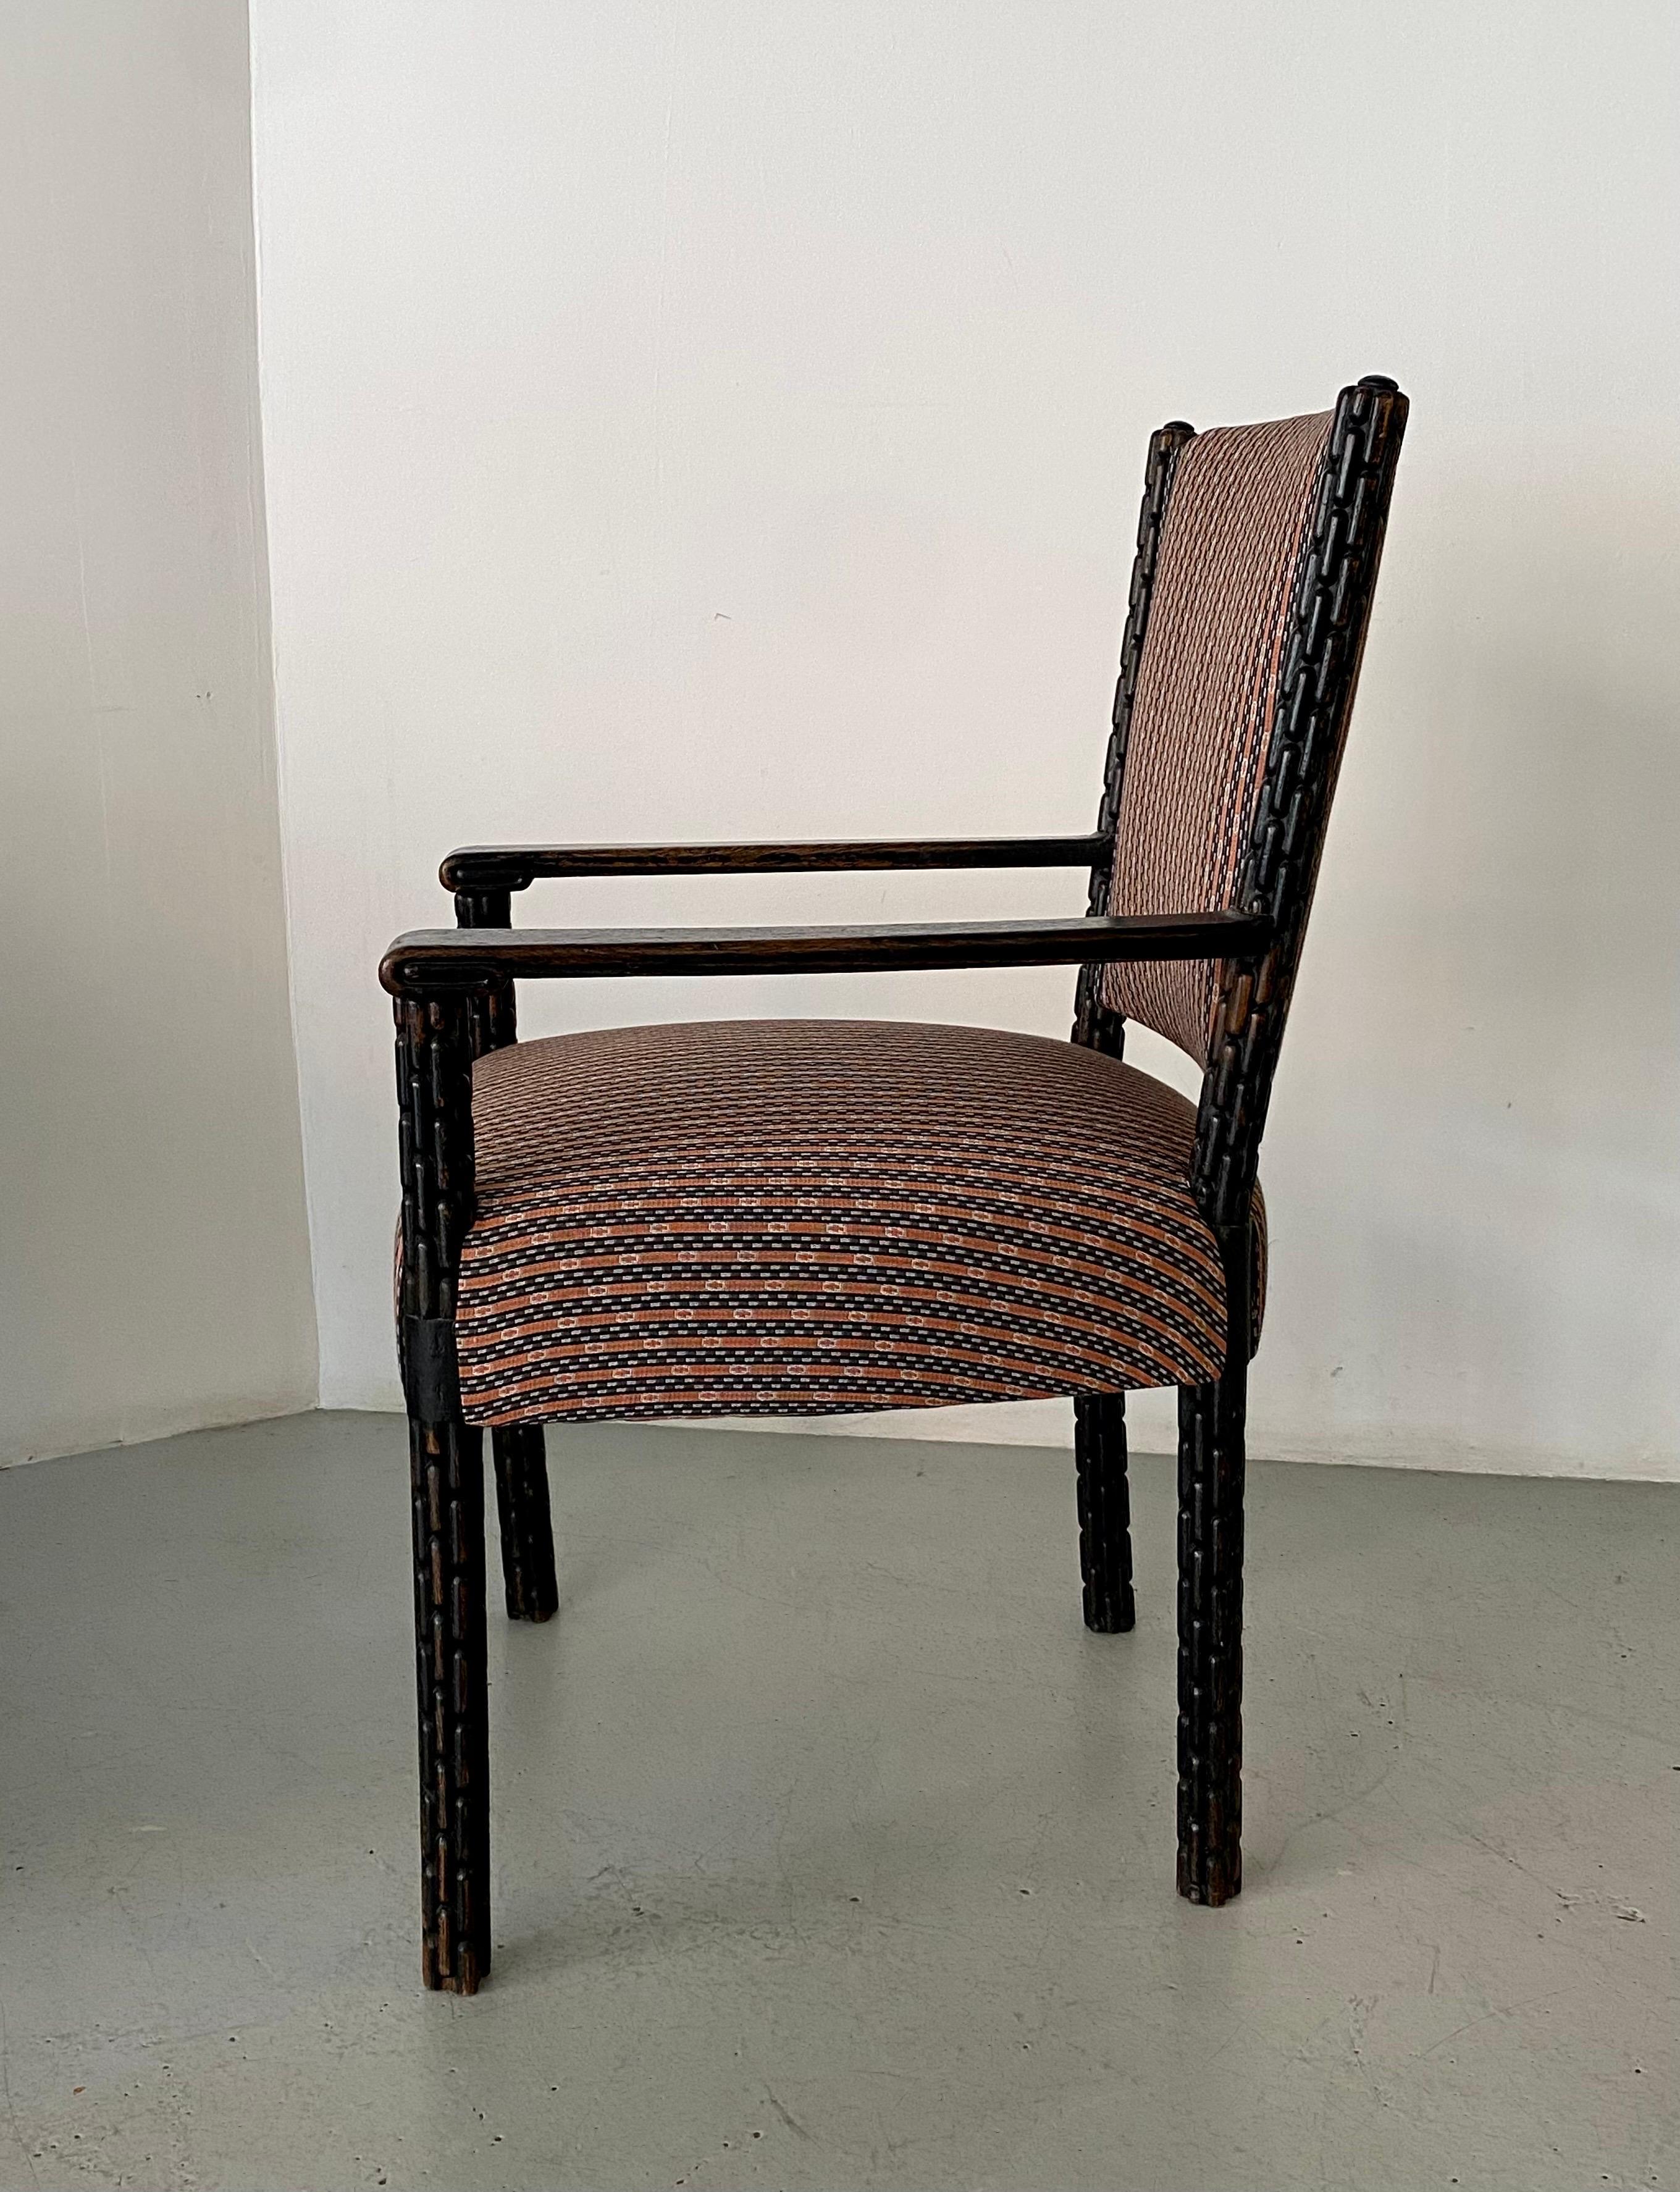 Hand-carved Austrian chair from the 1920s in black stained oak. Exquisitely carved details on legs and arms exemplify the craftsmanship of the era. Chair has been extremely well maintained and was recently reupholstered. Great for use as desk or